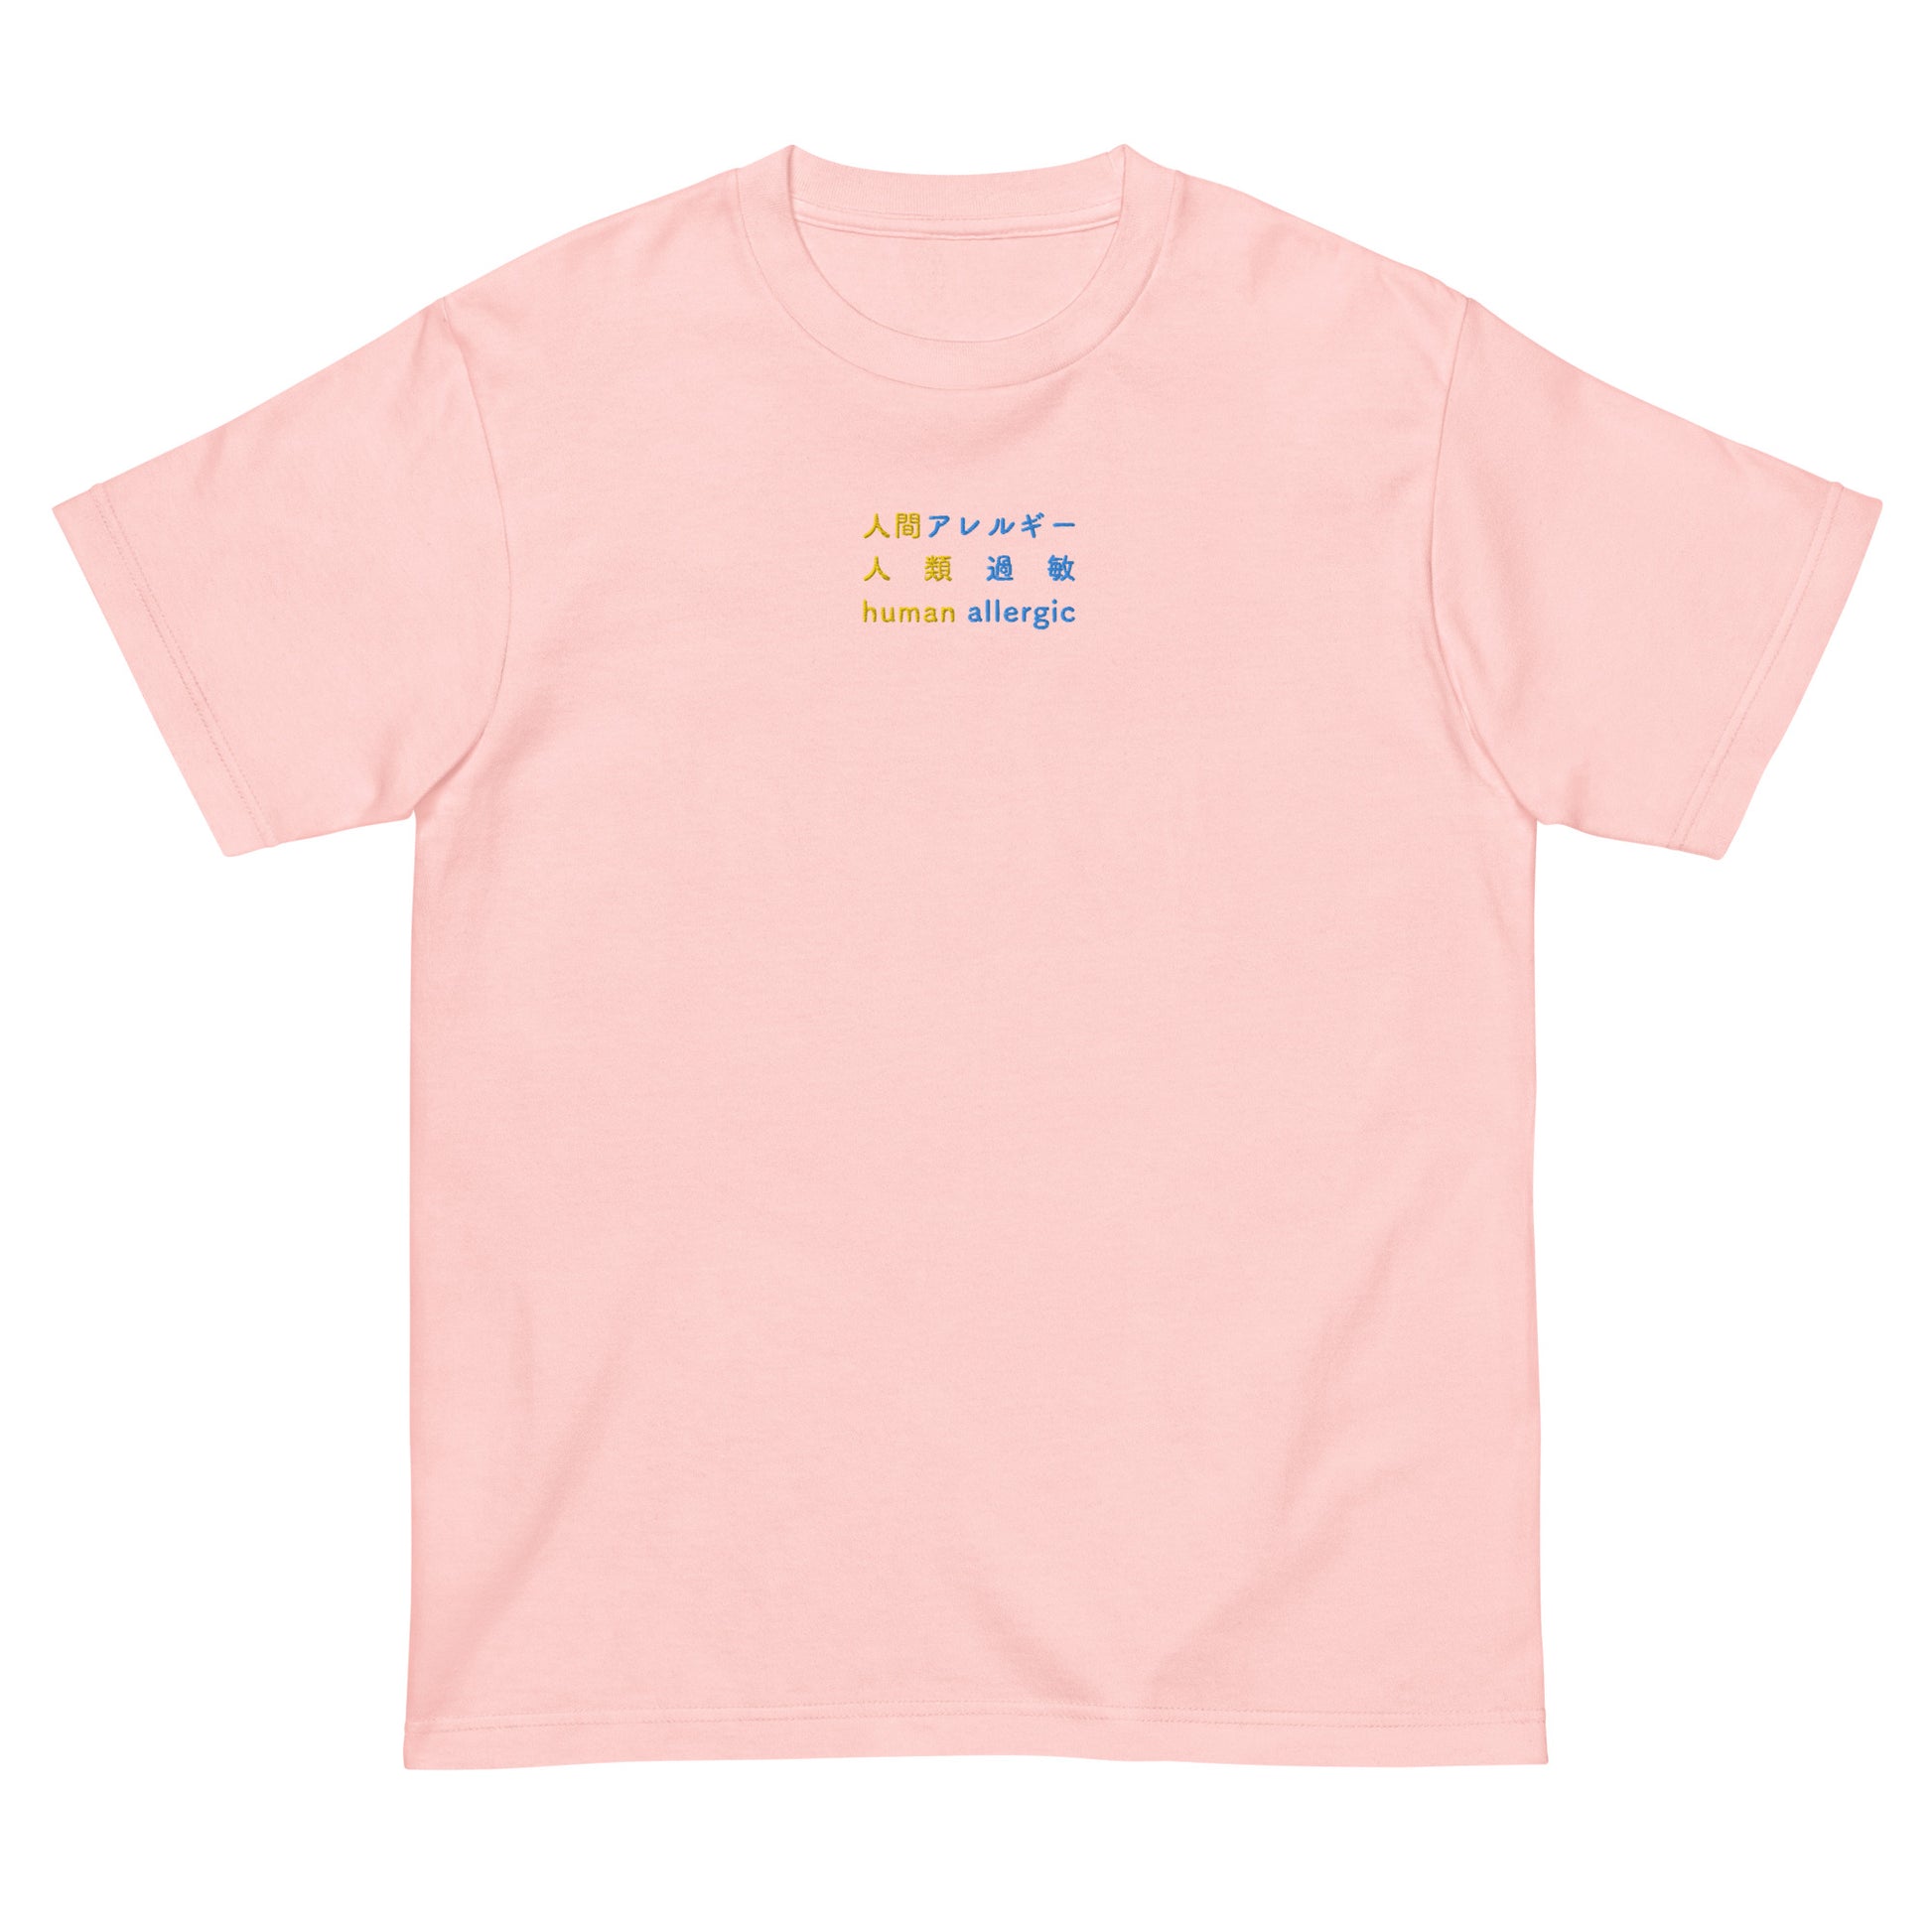 Pink High Quality Tee - Front Design with an Yellow, Blue Embroidery "Human Allergic" in Japanese,Chinese and English